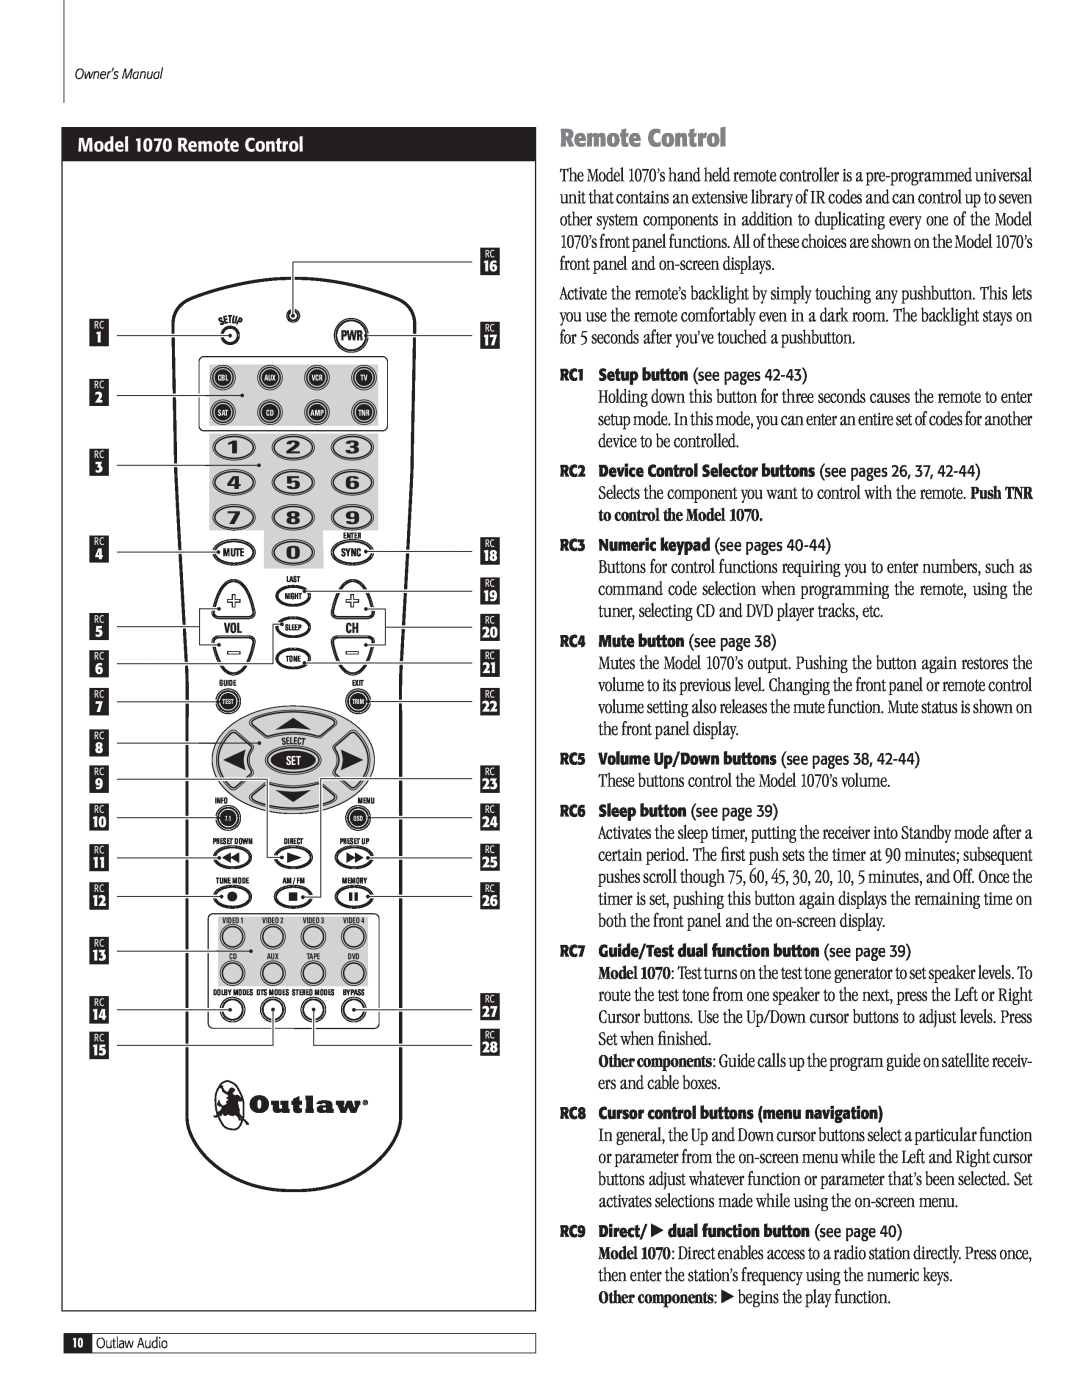 Outlaw Audio Model 1070 Remote Control, These buttons control the Model 1070’s volume, to control the Model 